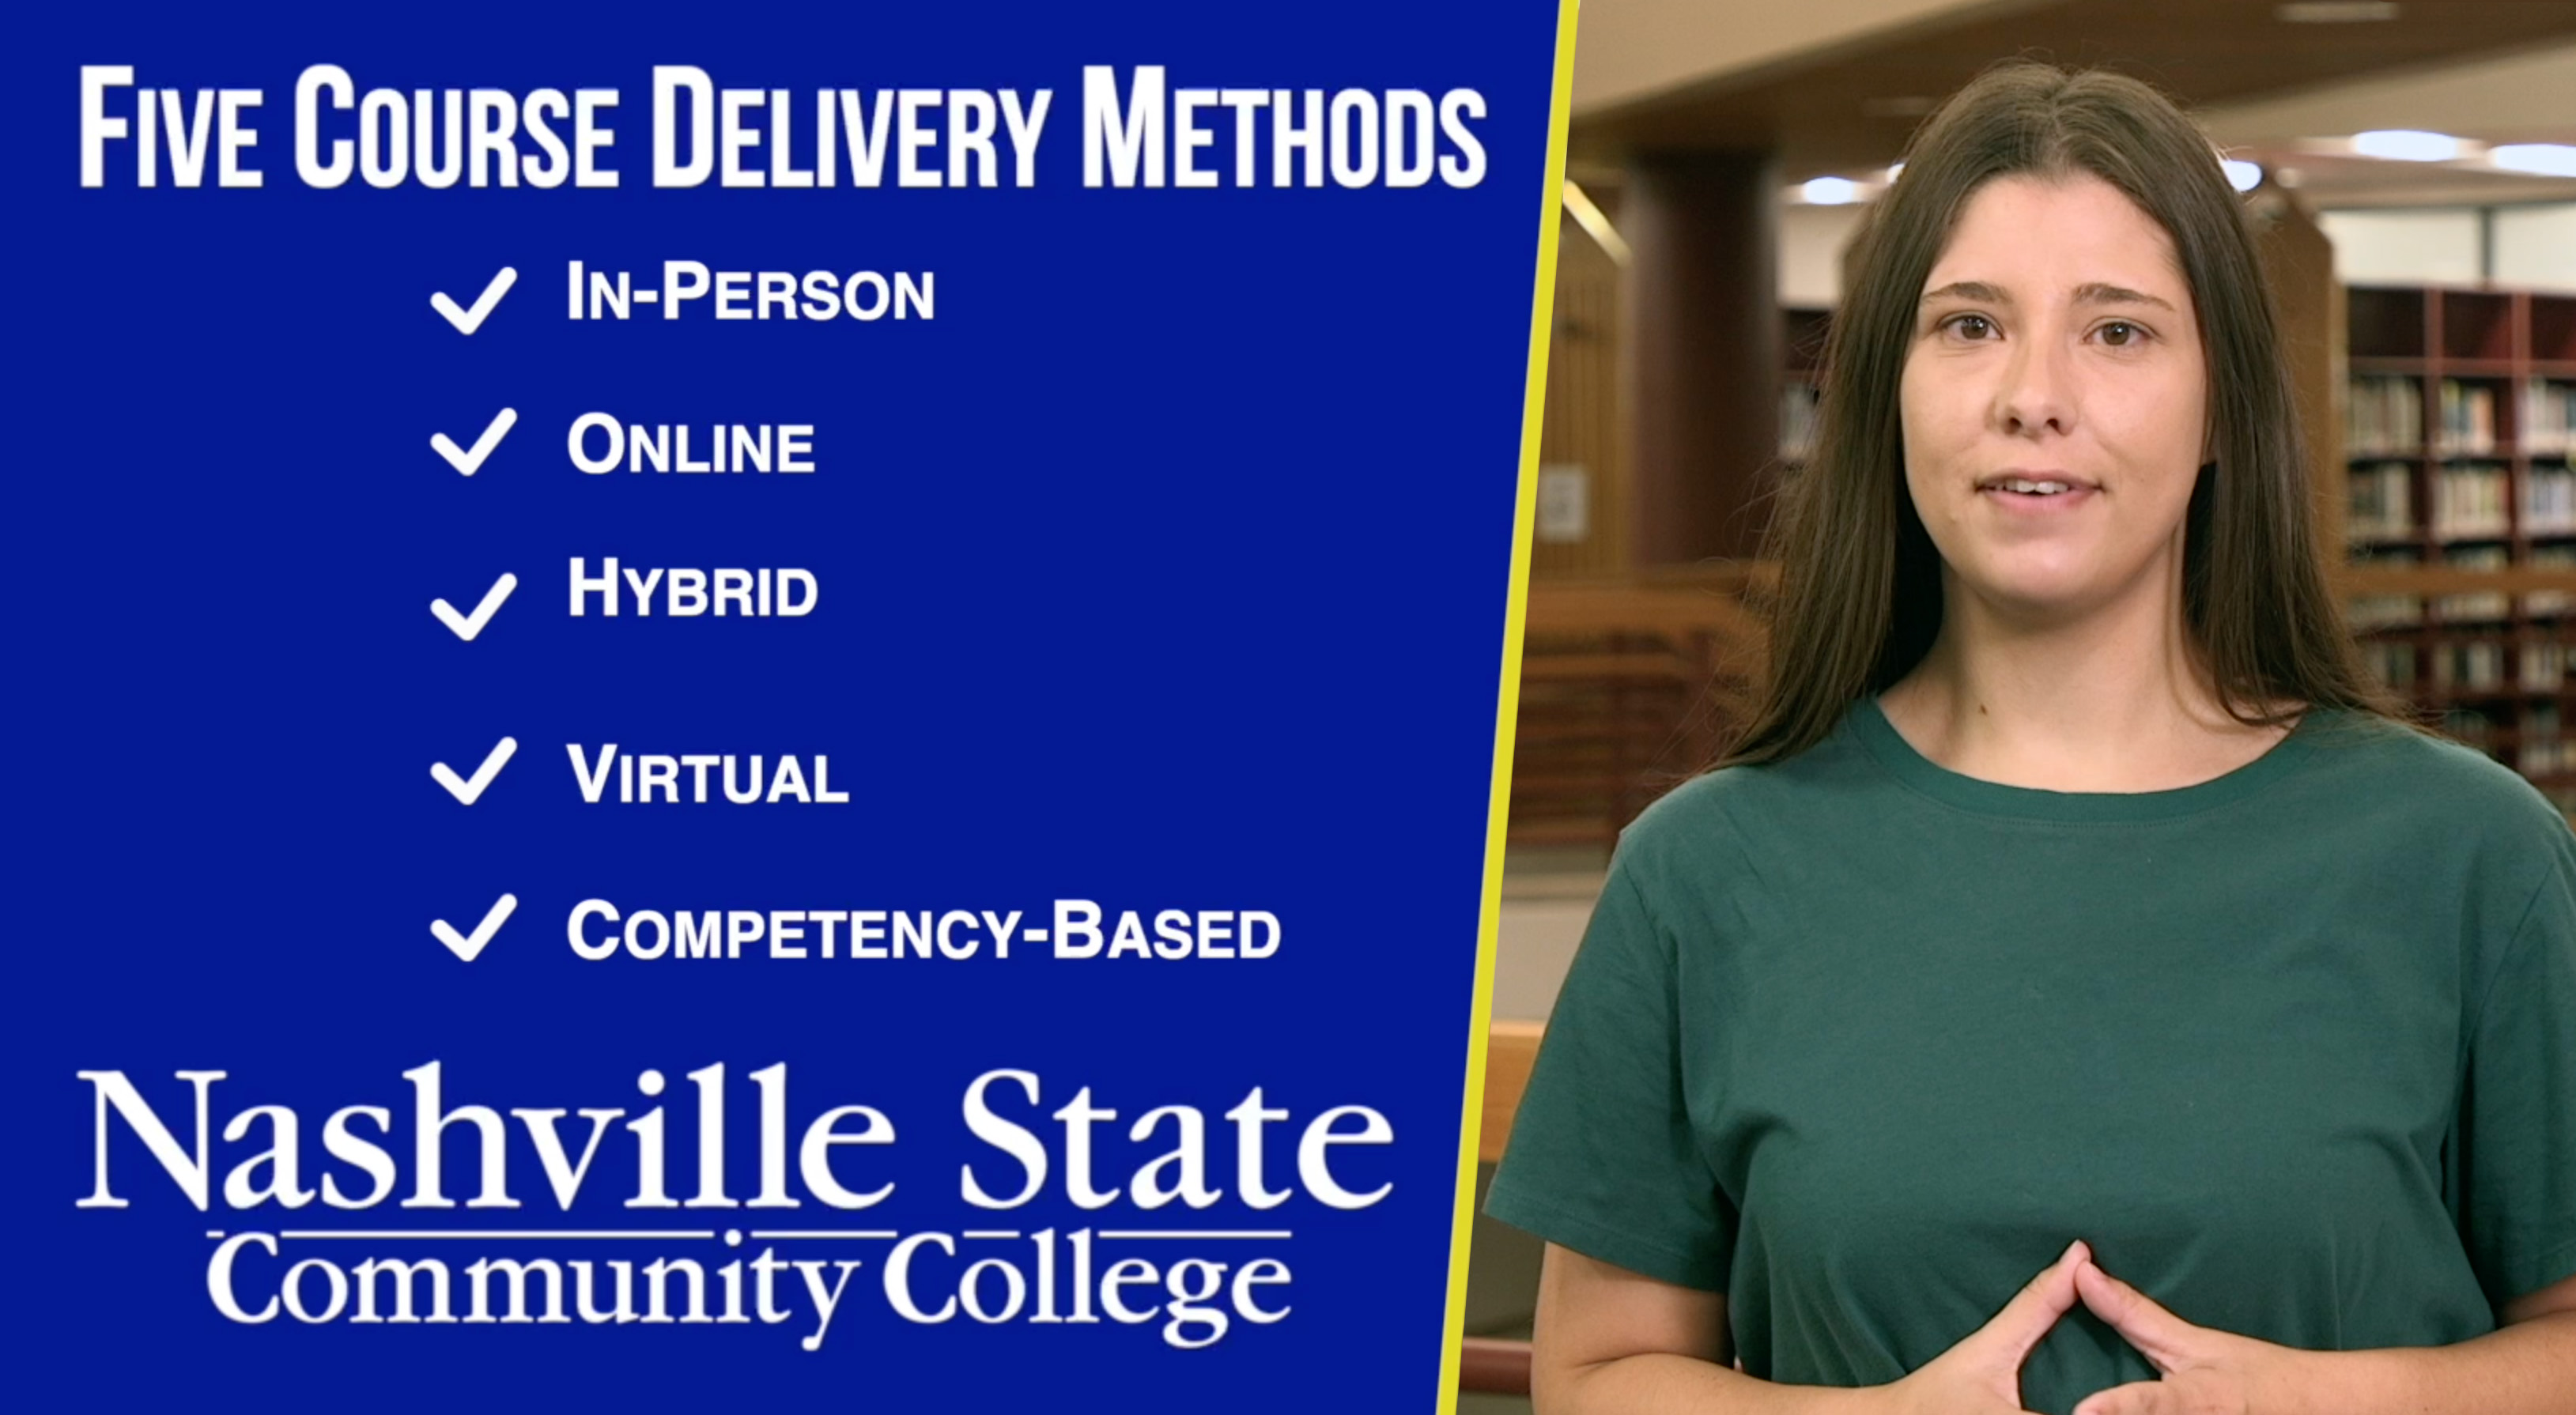 Five course delivery methods: in-person, online, hybrid, virtual, and competency-based.